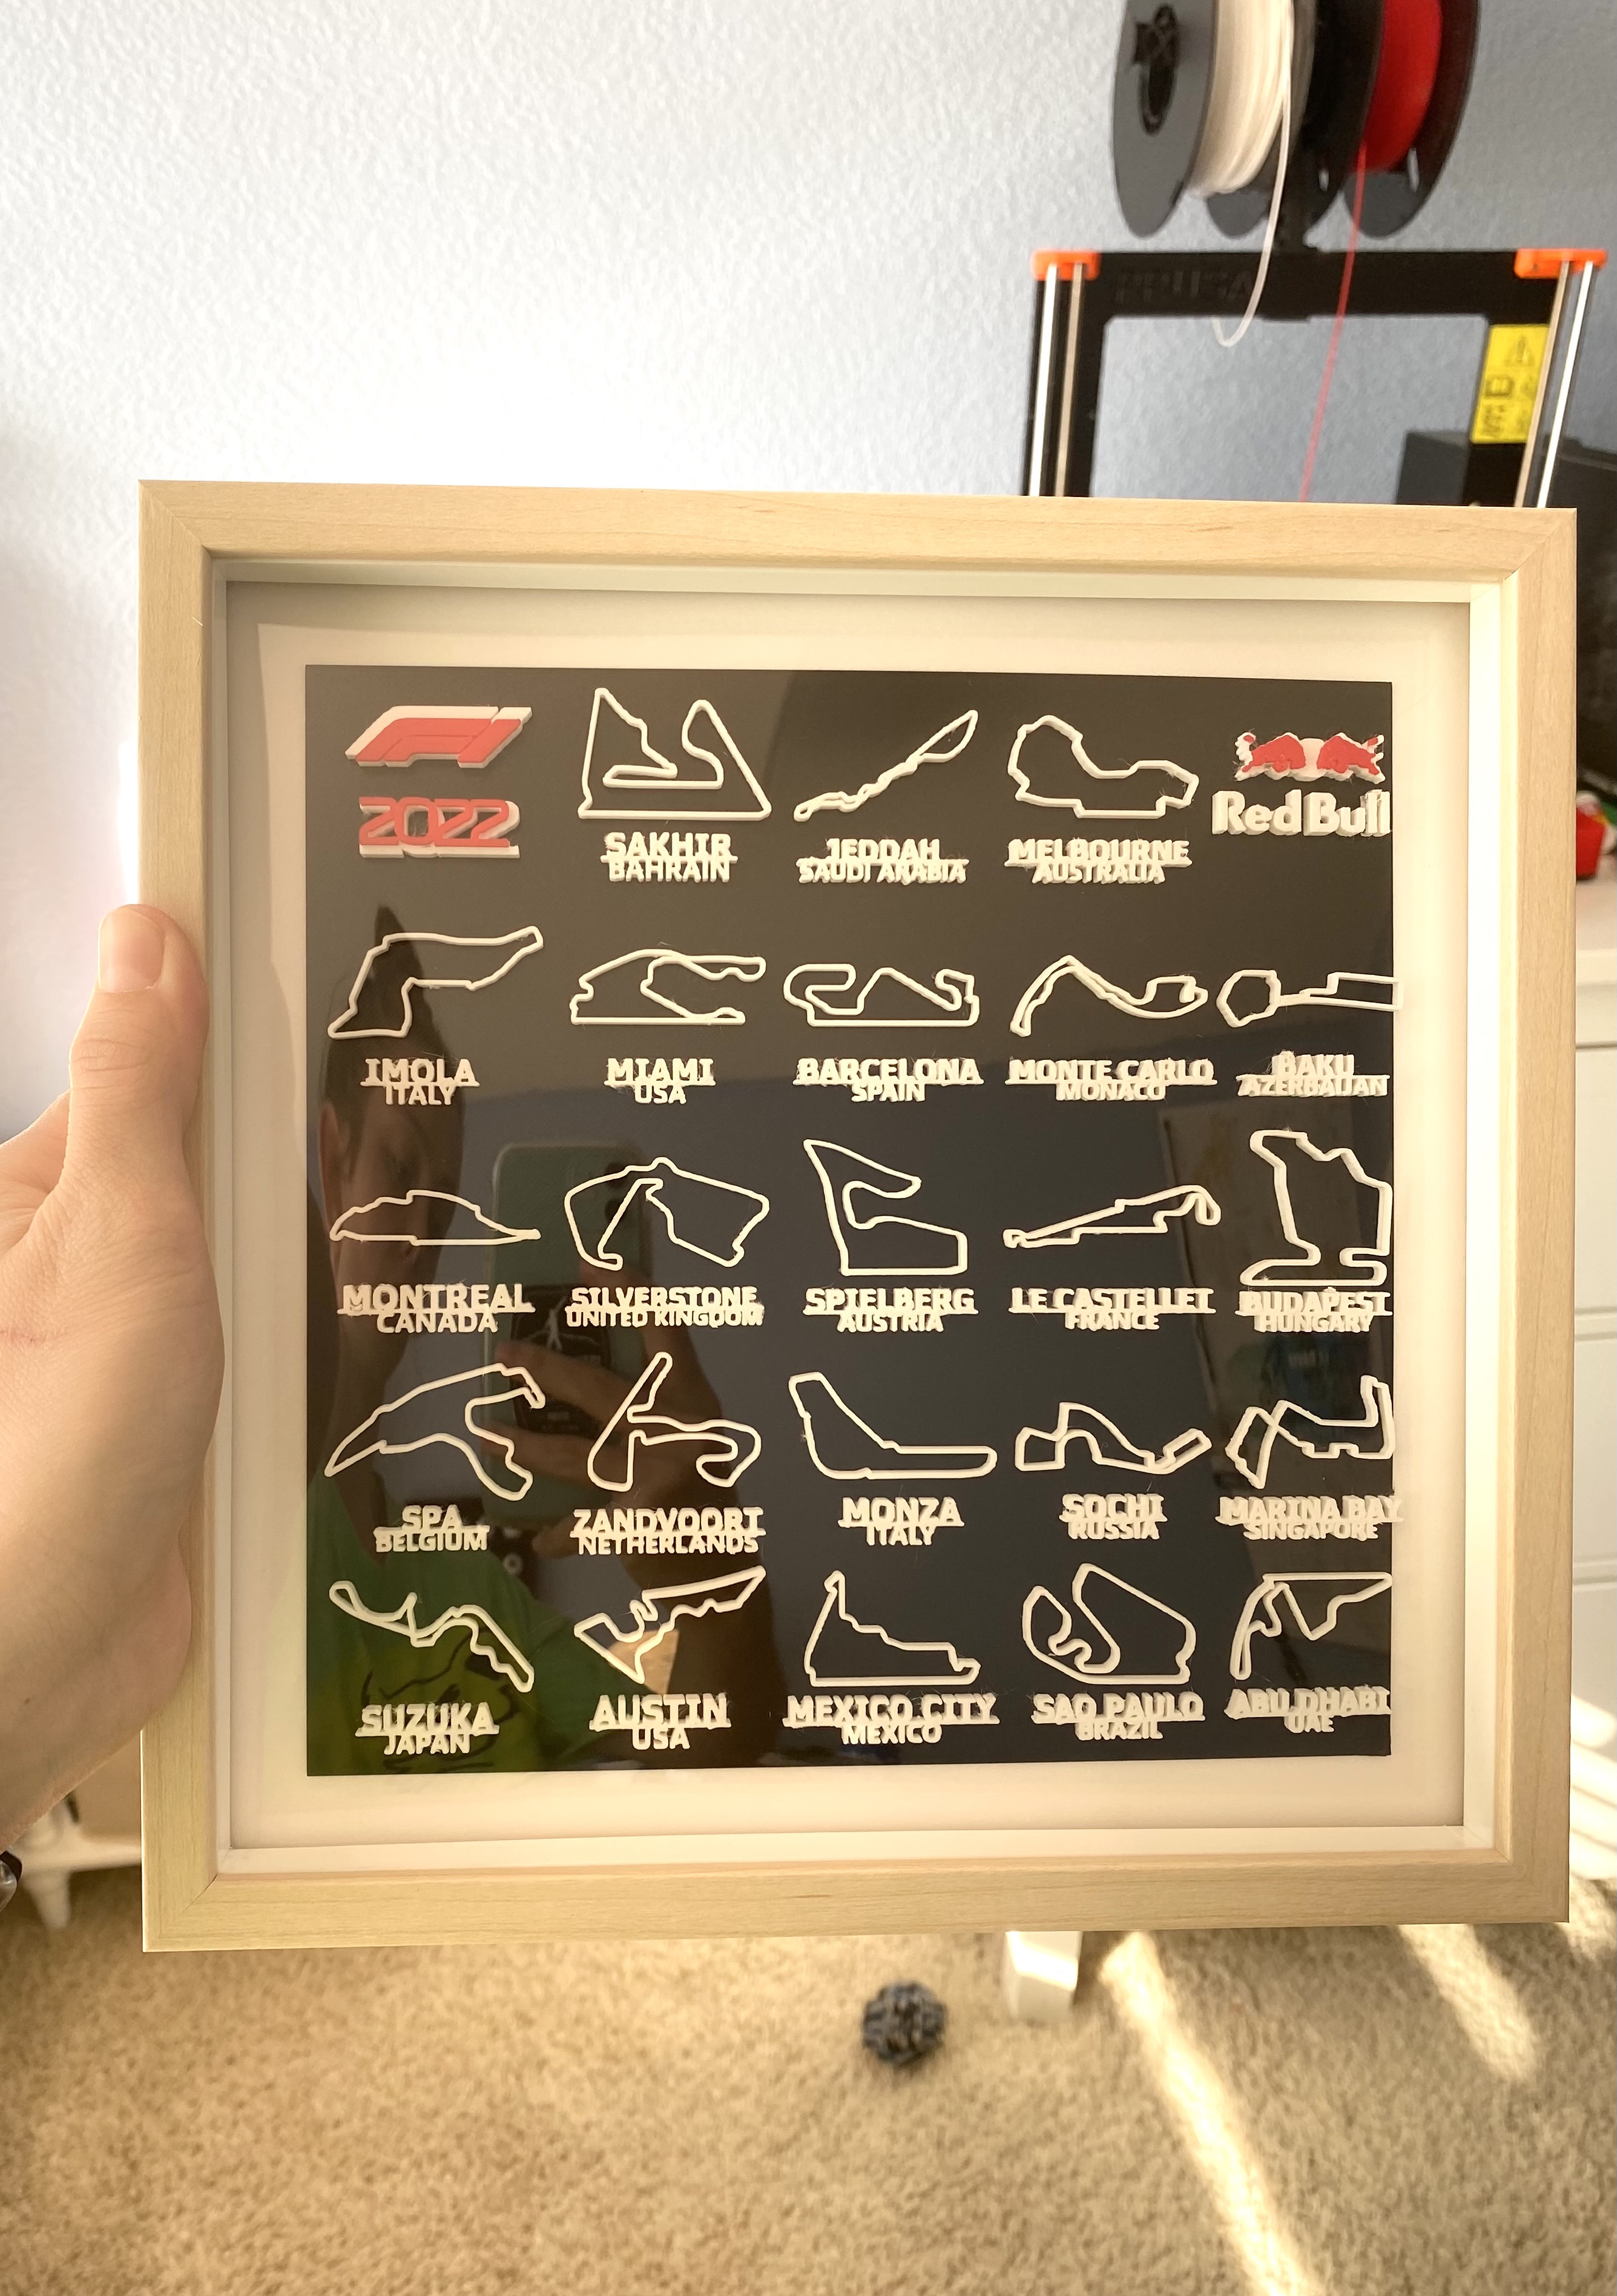 Formula 1 2022 Schedule with Red Bull Logo